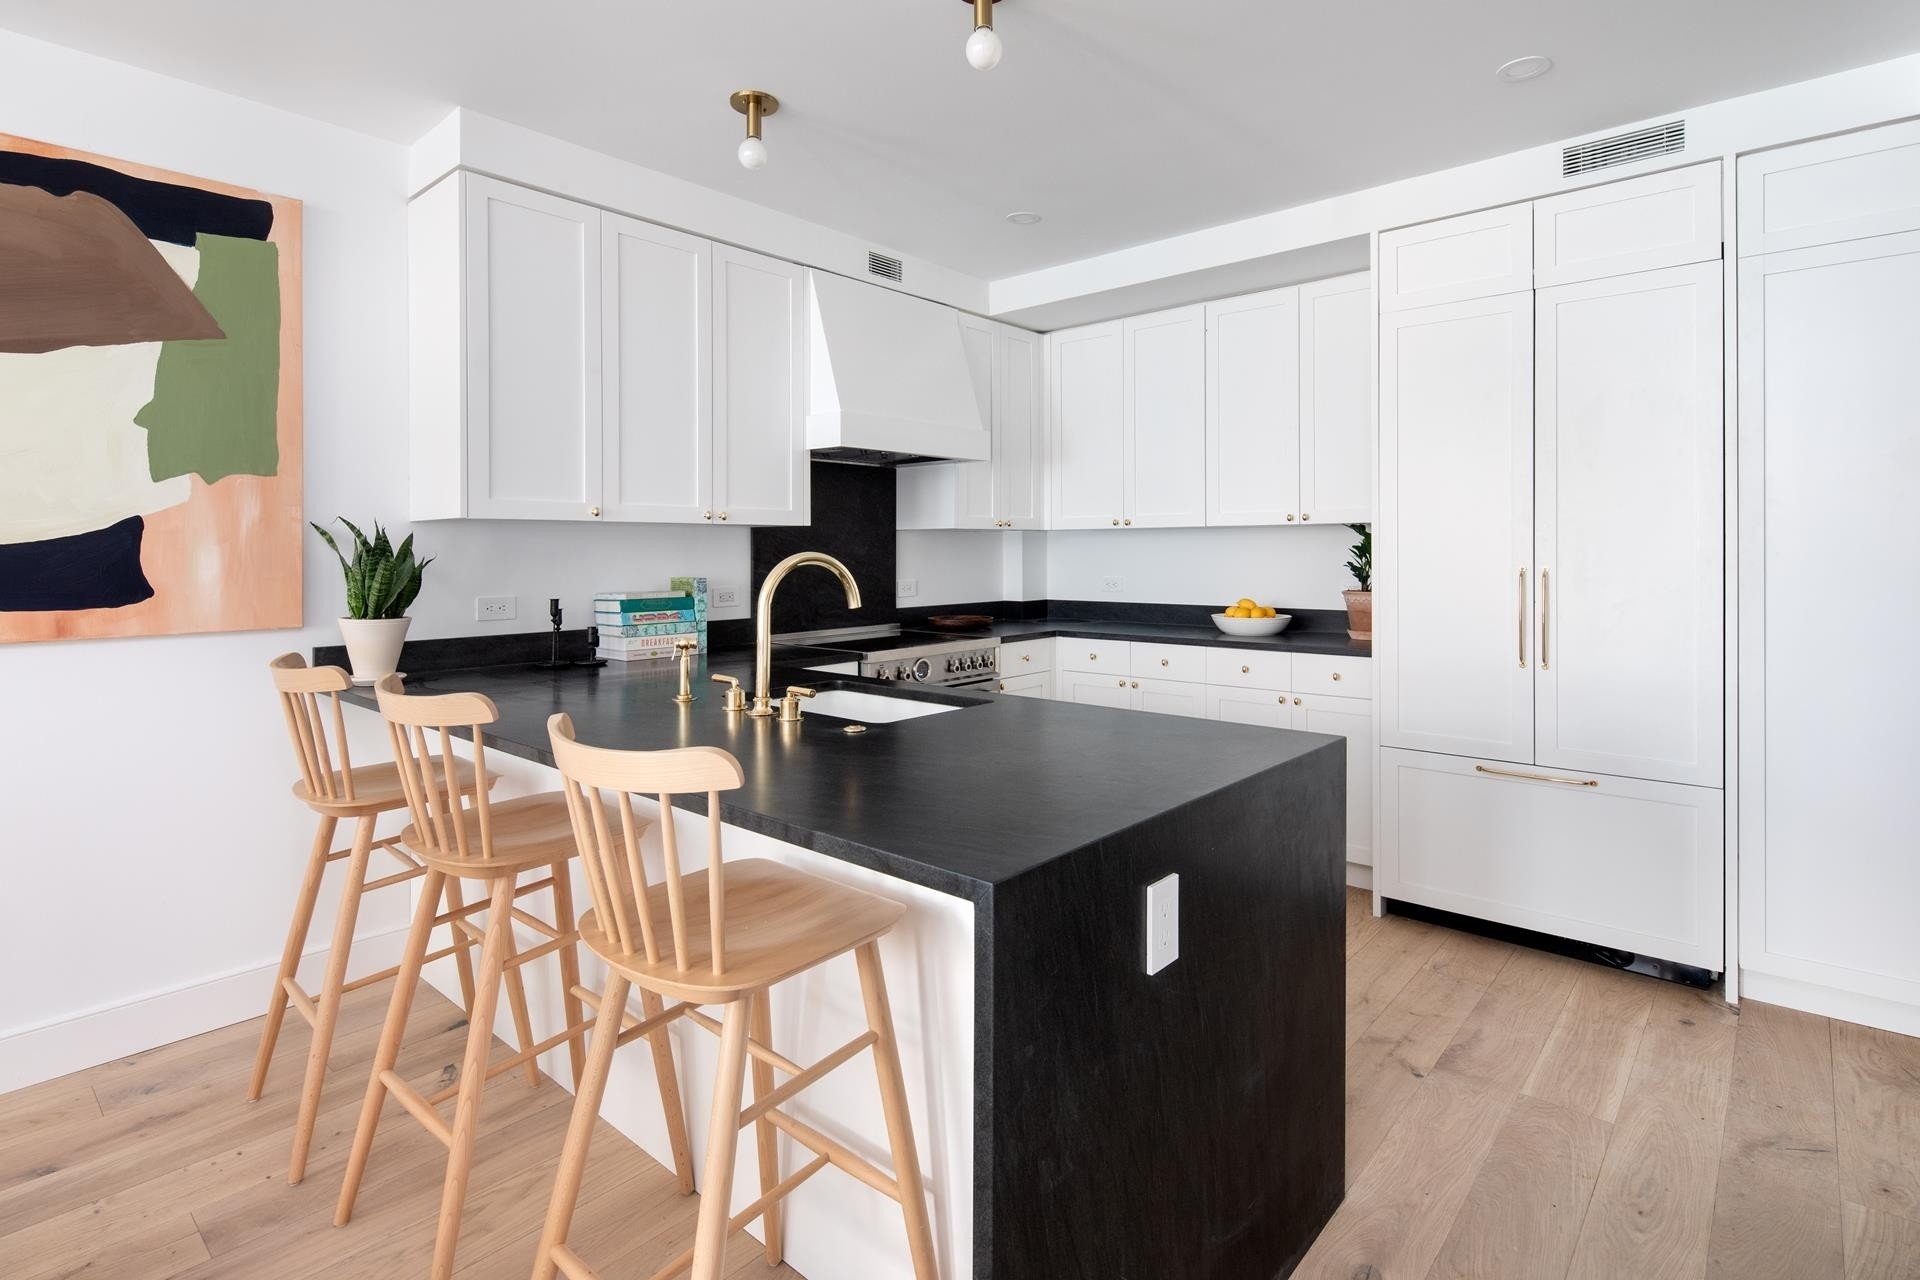 3. Condominiums for Sale at The Butler Collecti, 350 BUTLER ST, 2B Park Slope, Brooklyn, NY 11217